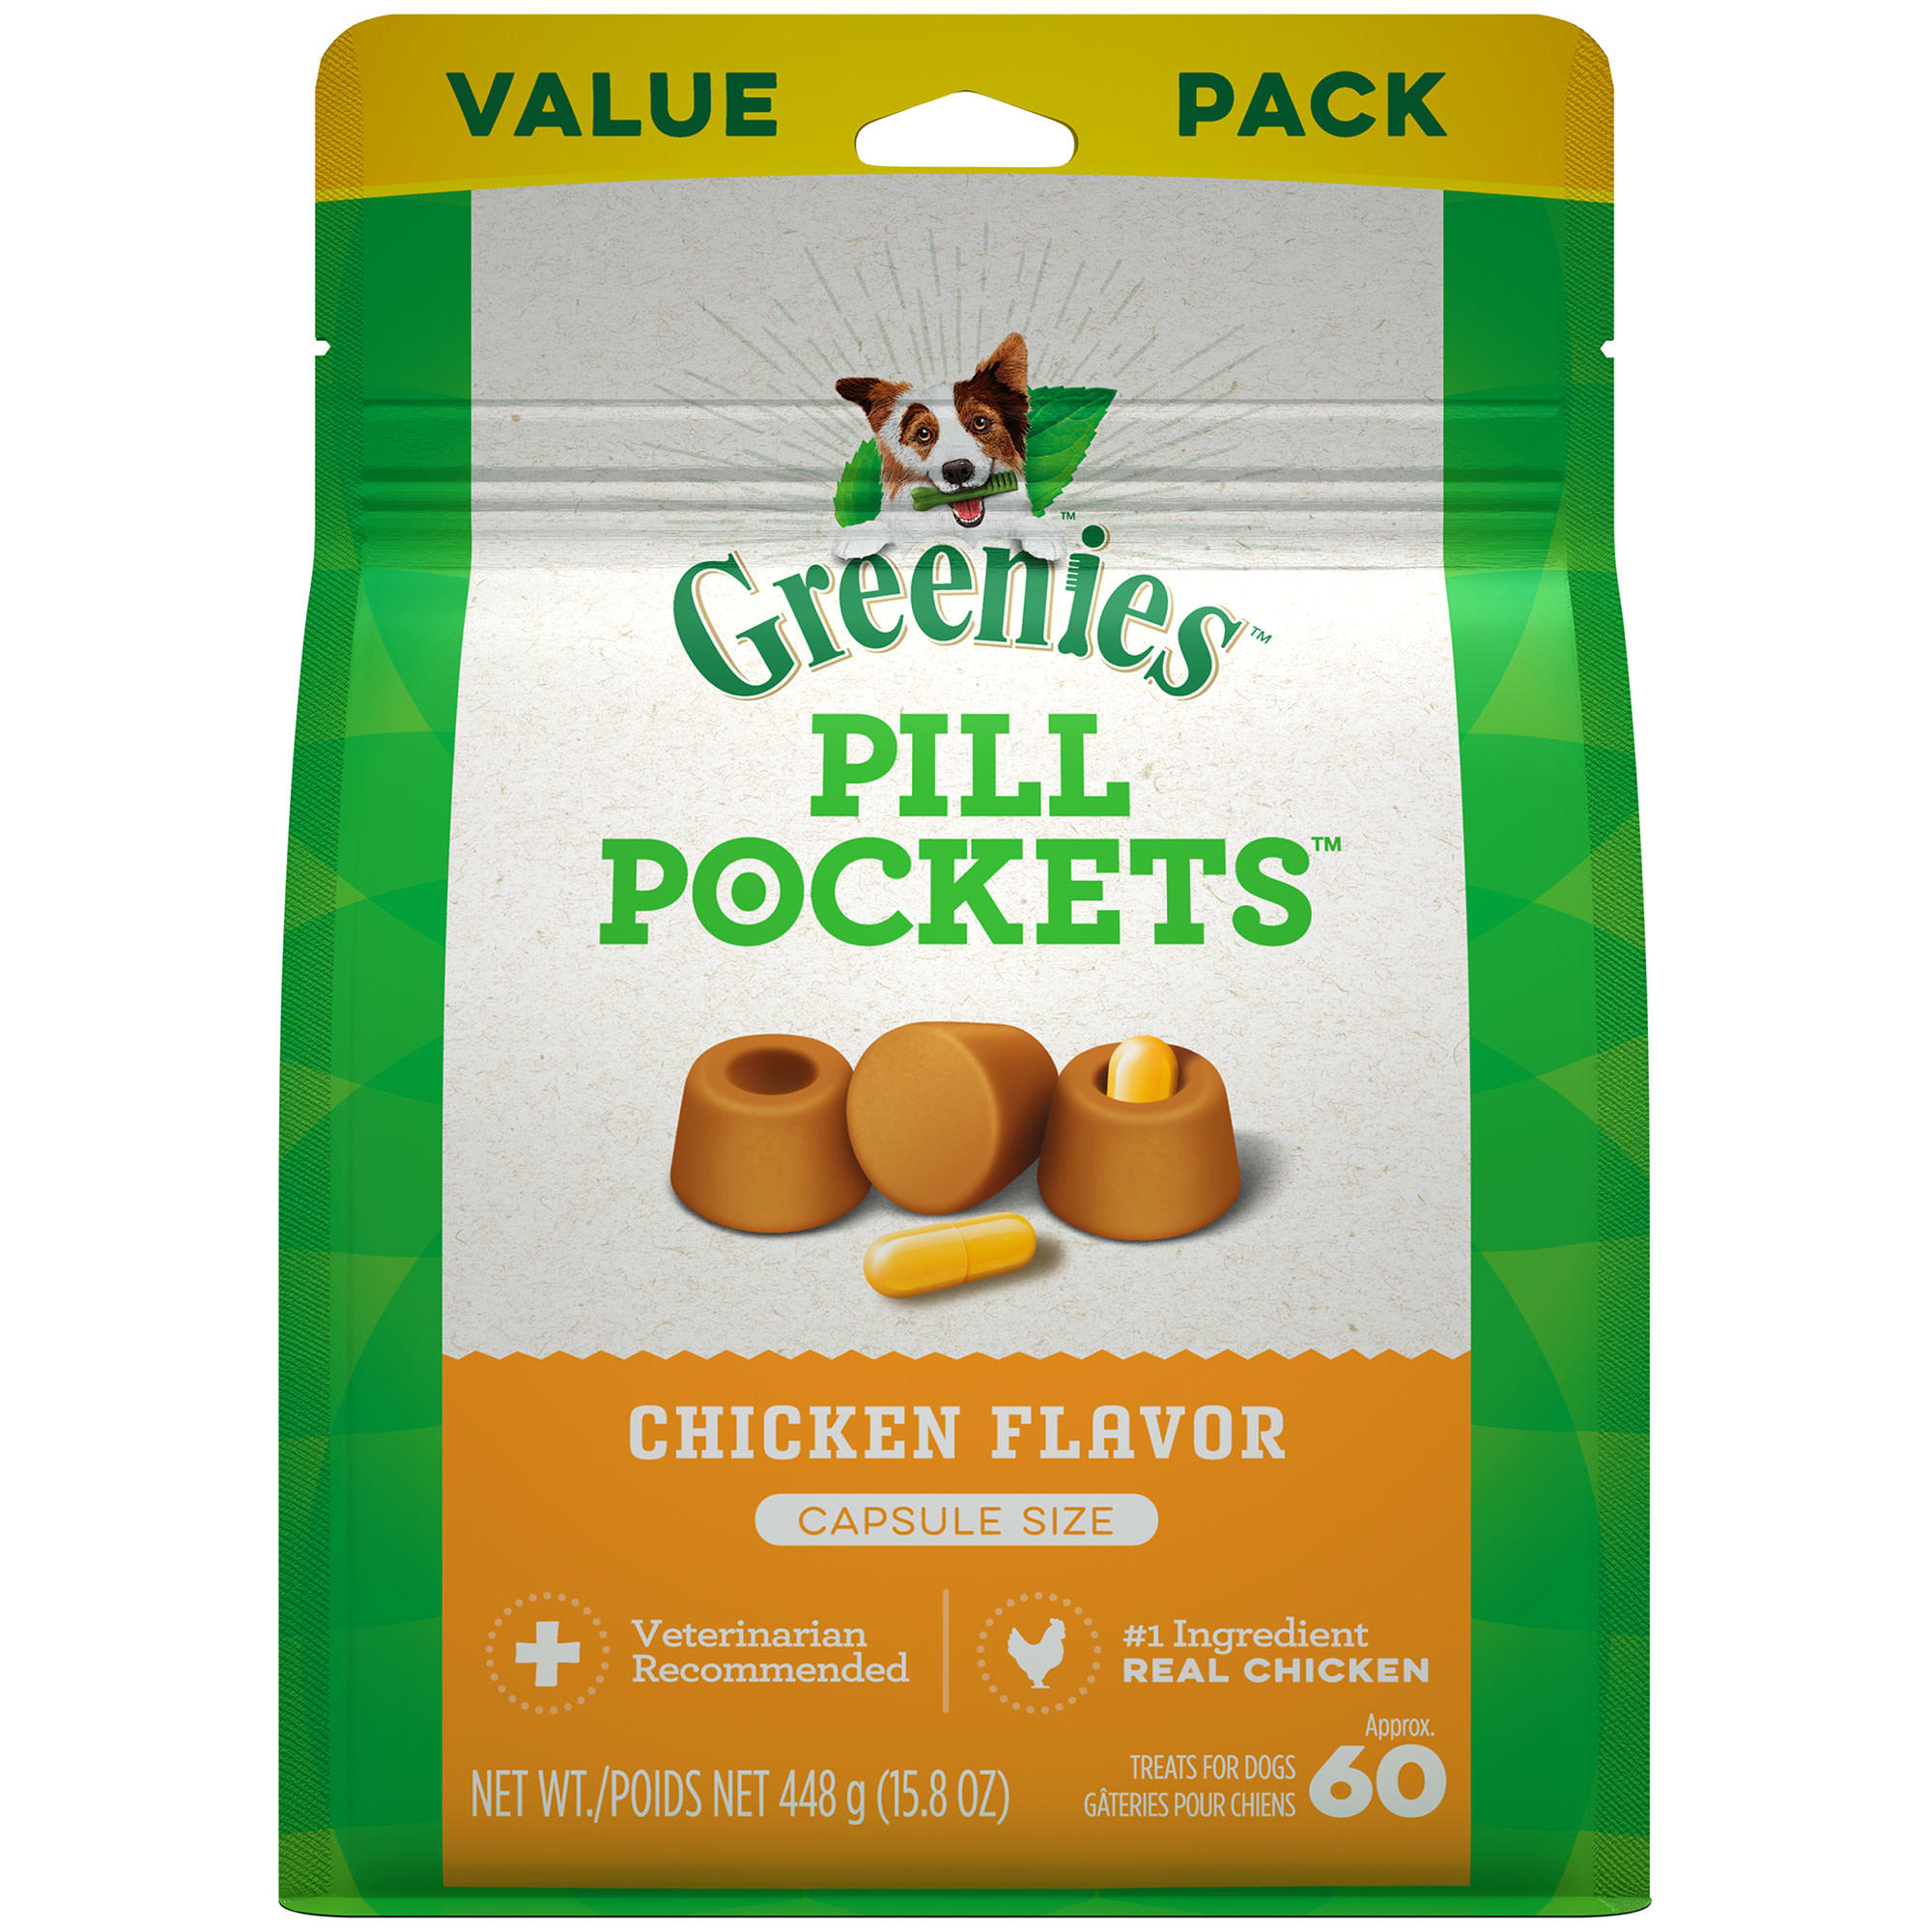 Greenies Pill Pockets Capsule Size Chicken Flavor Dog Treats, 15.8 oz., Count of 120, 120 CT